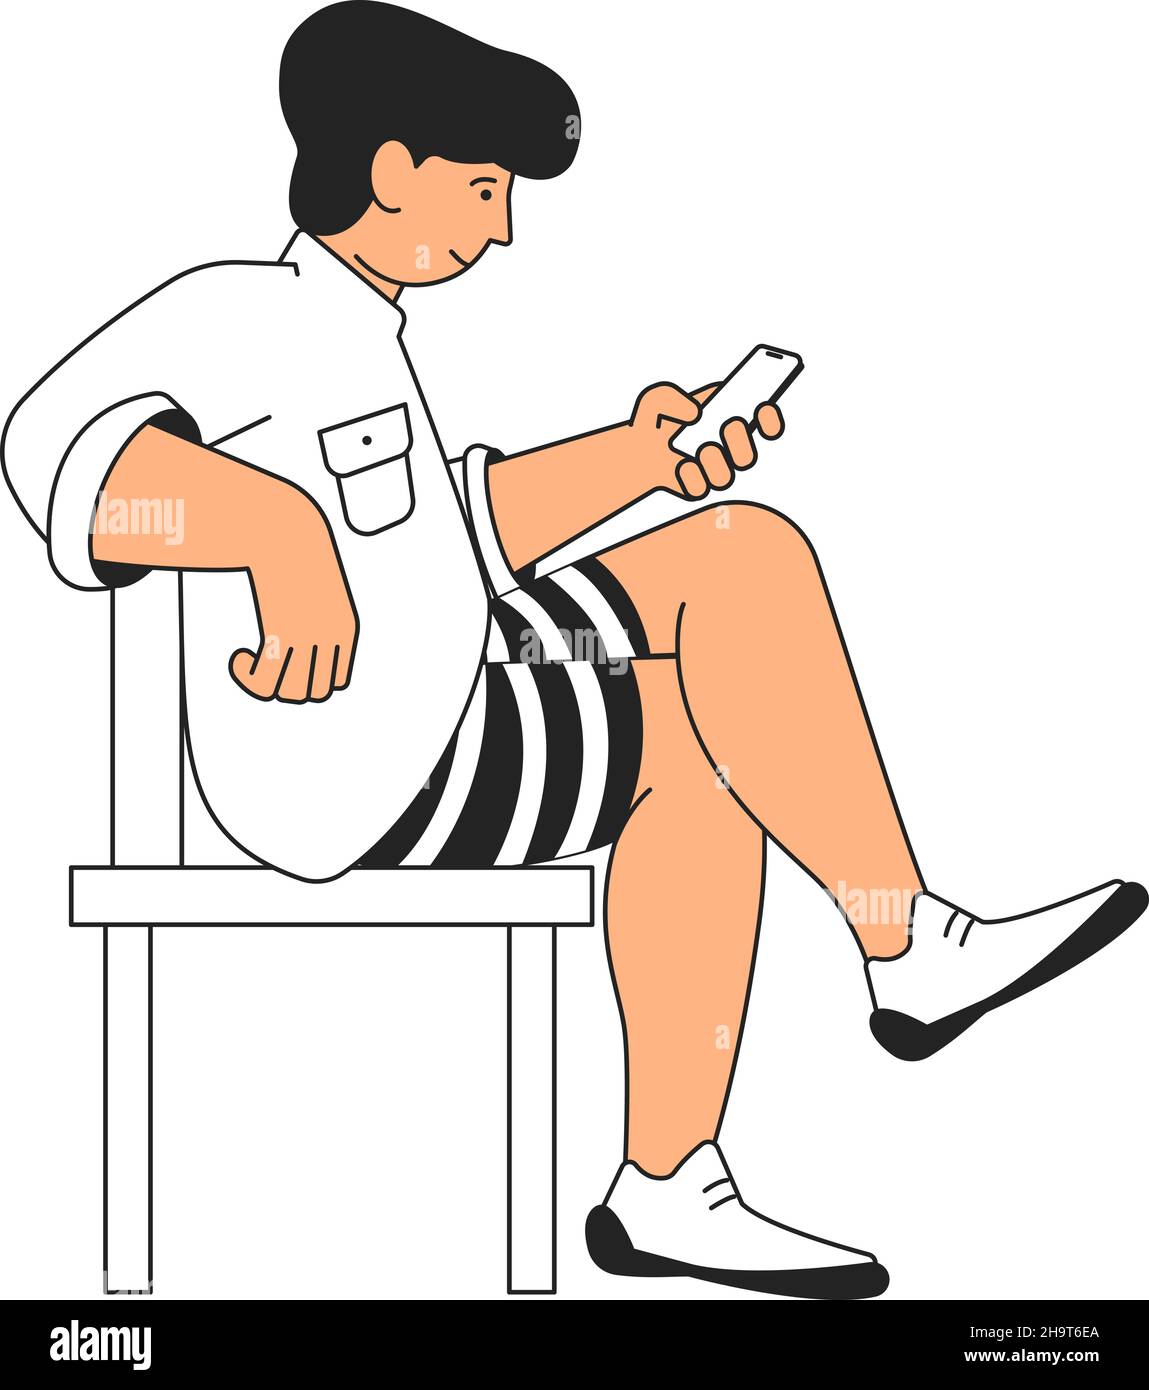 Girl using phone. Young woman sitting legs crossed looking in smartphone Stock Vector